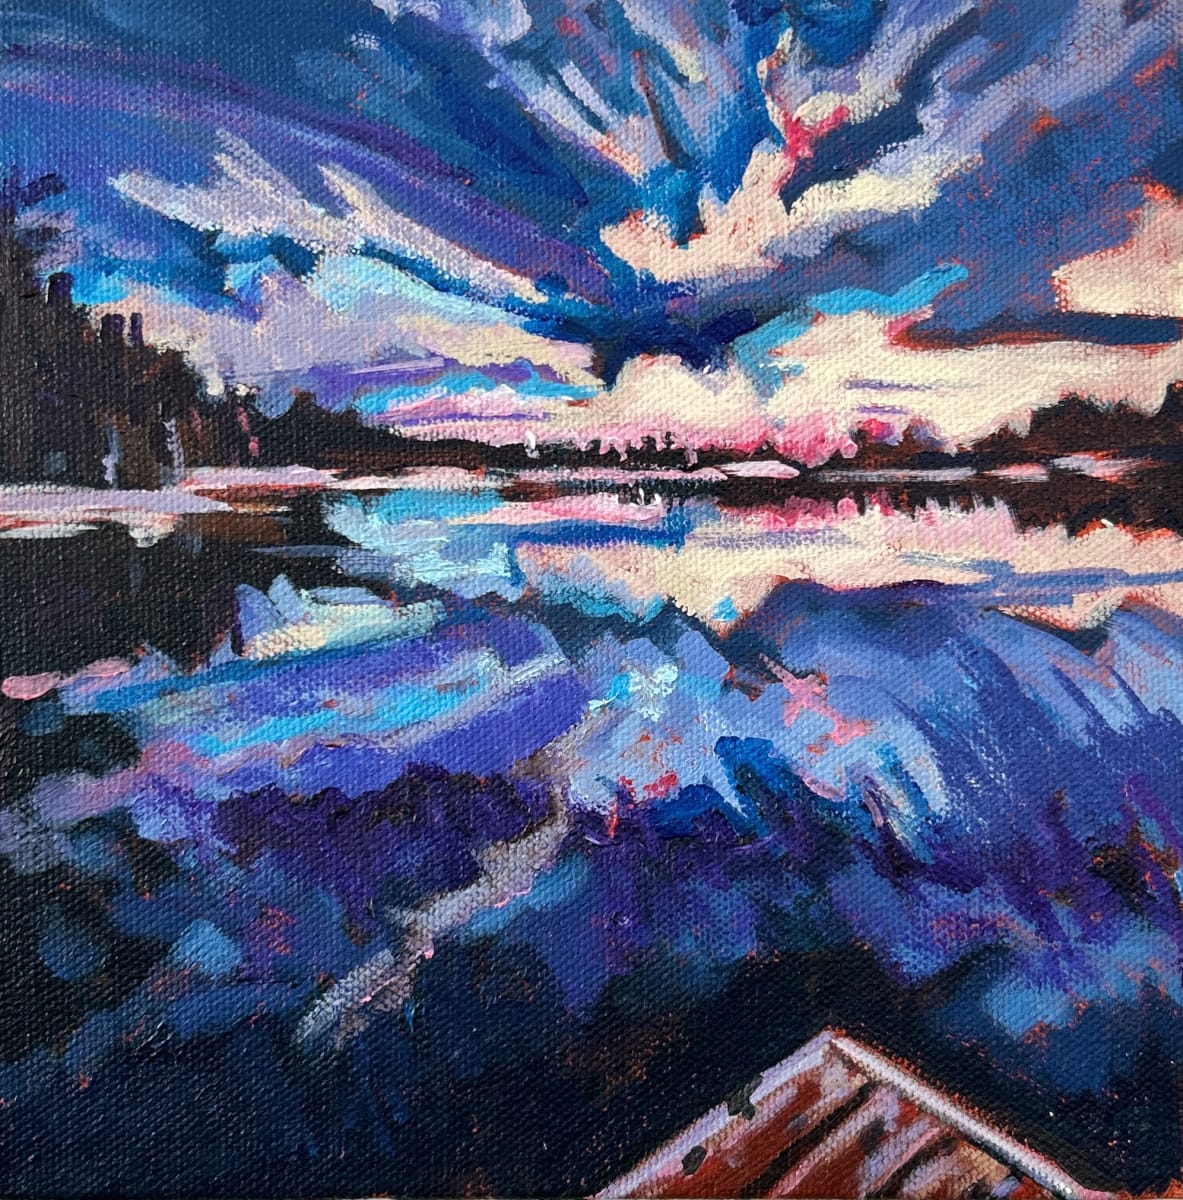 Blue and Purple Sunset, Bonnechere River by Lynne Ryall  Image: Standing on the dock looking out over this river was breathtaking!